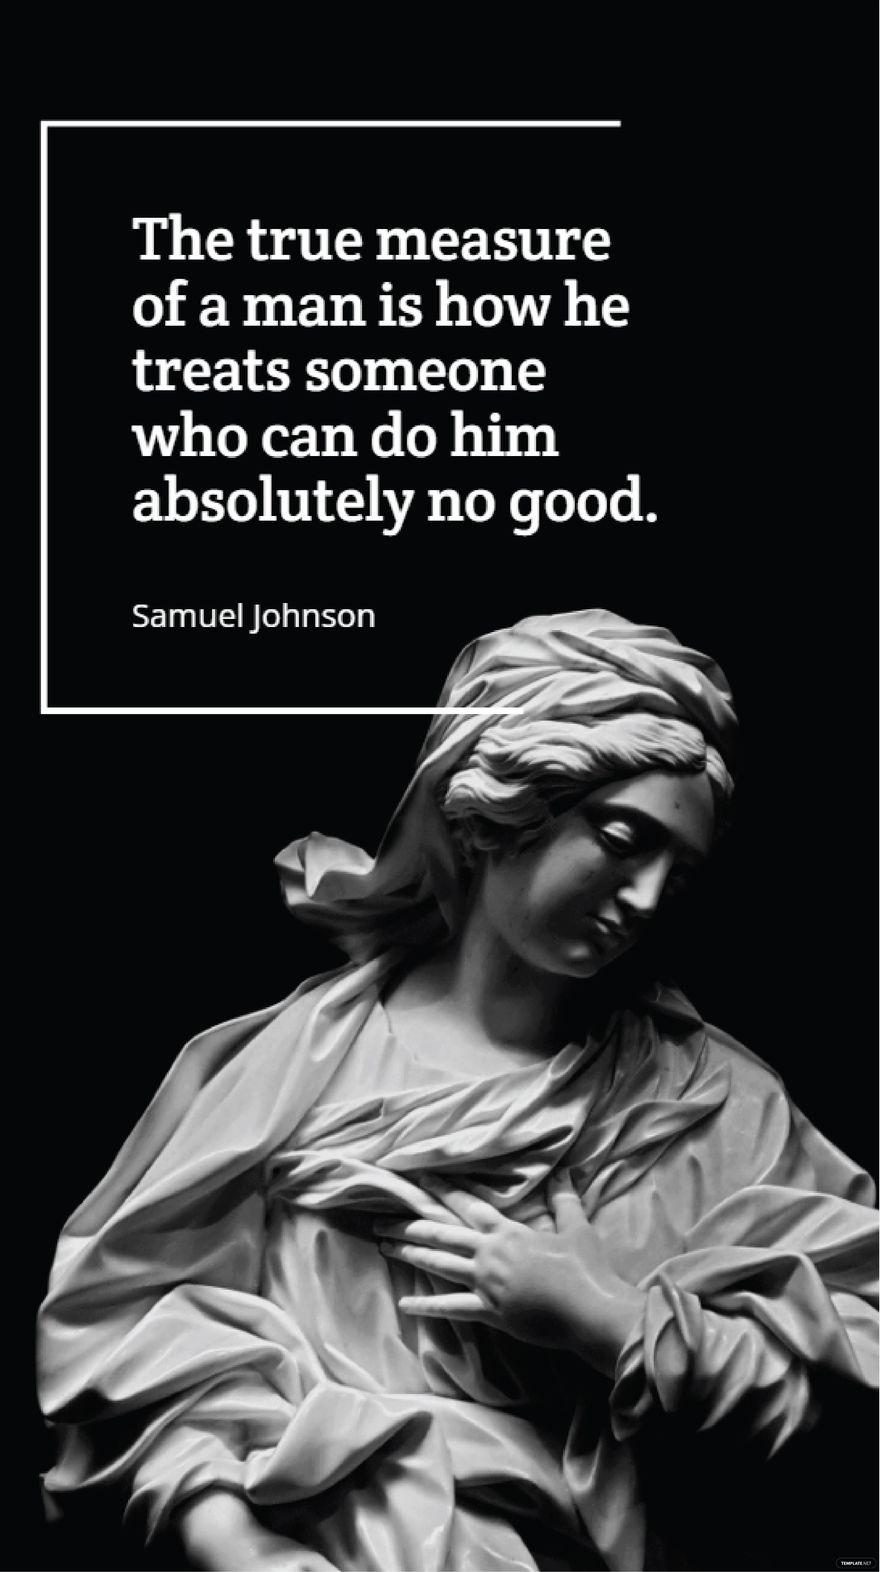 Samuel Johnson - The true measure of a man is how he treats someone who can do him absolutely no good.